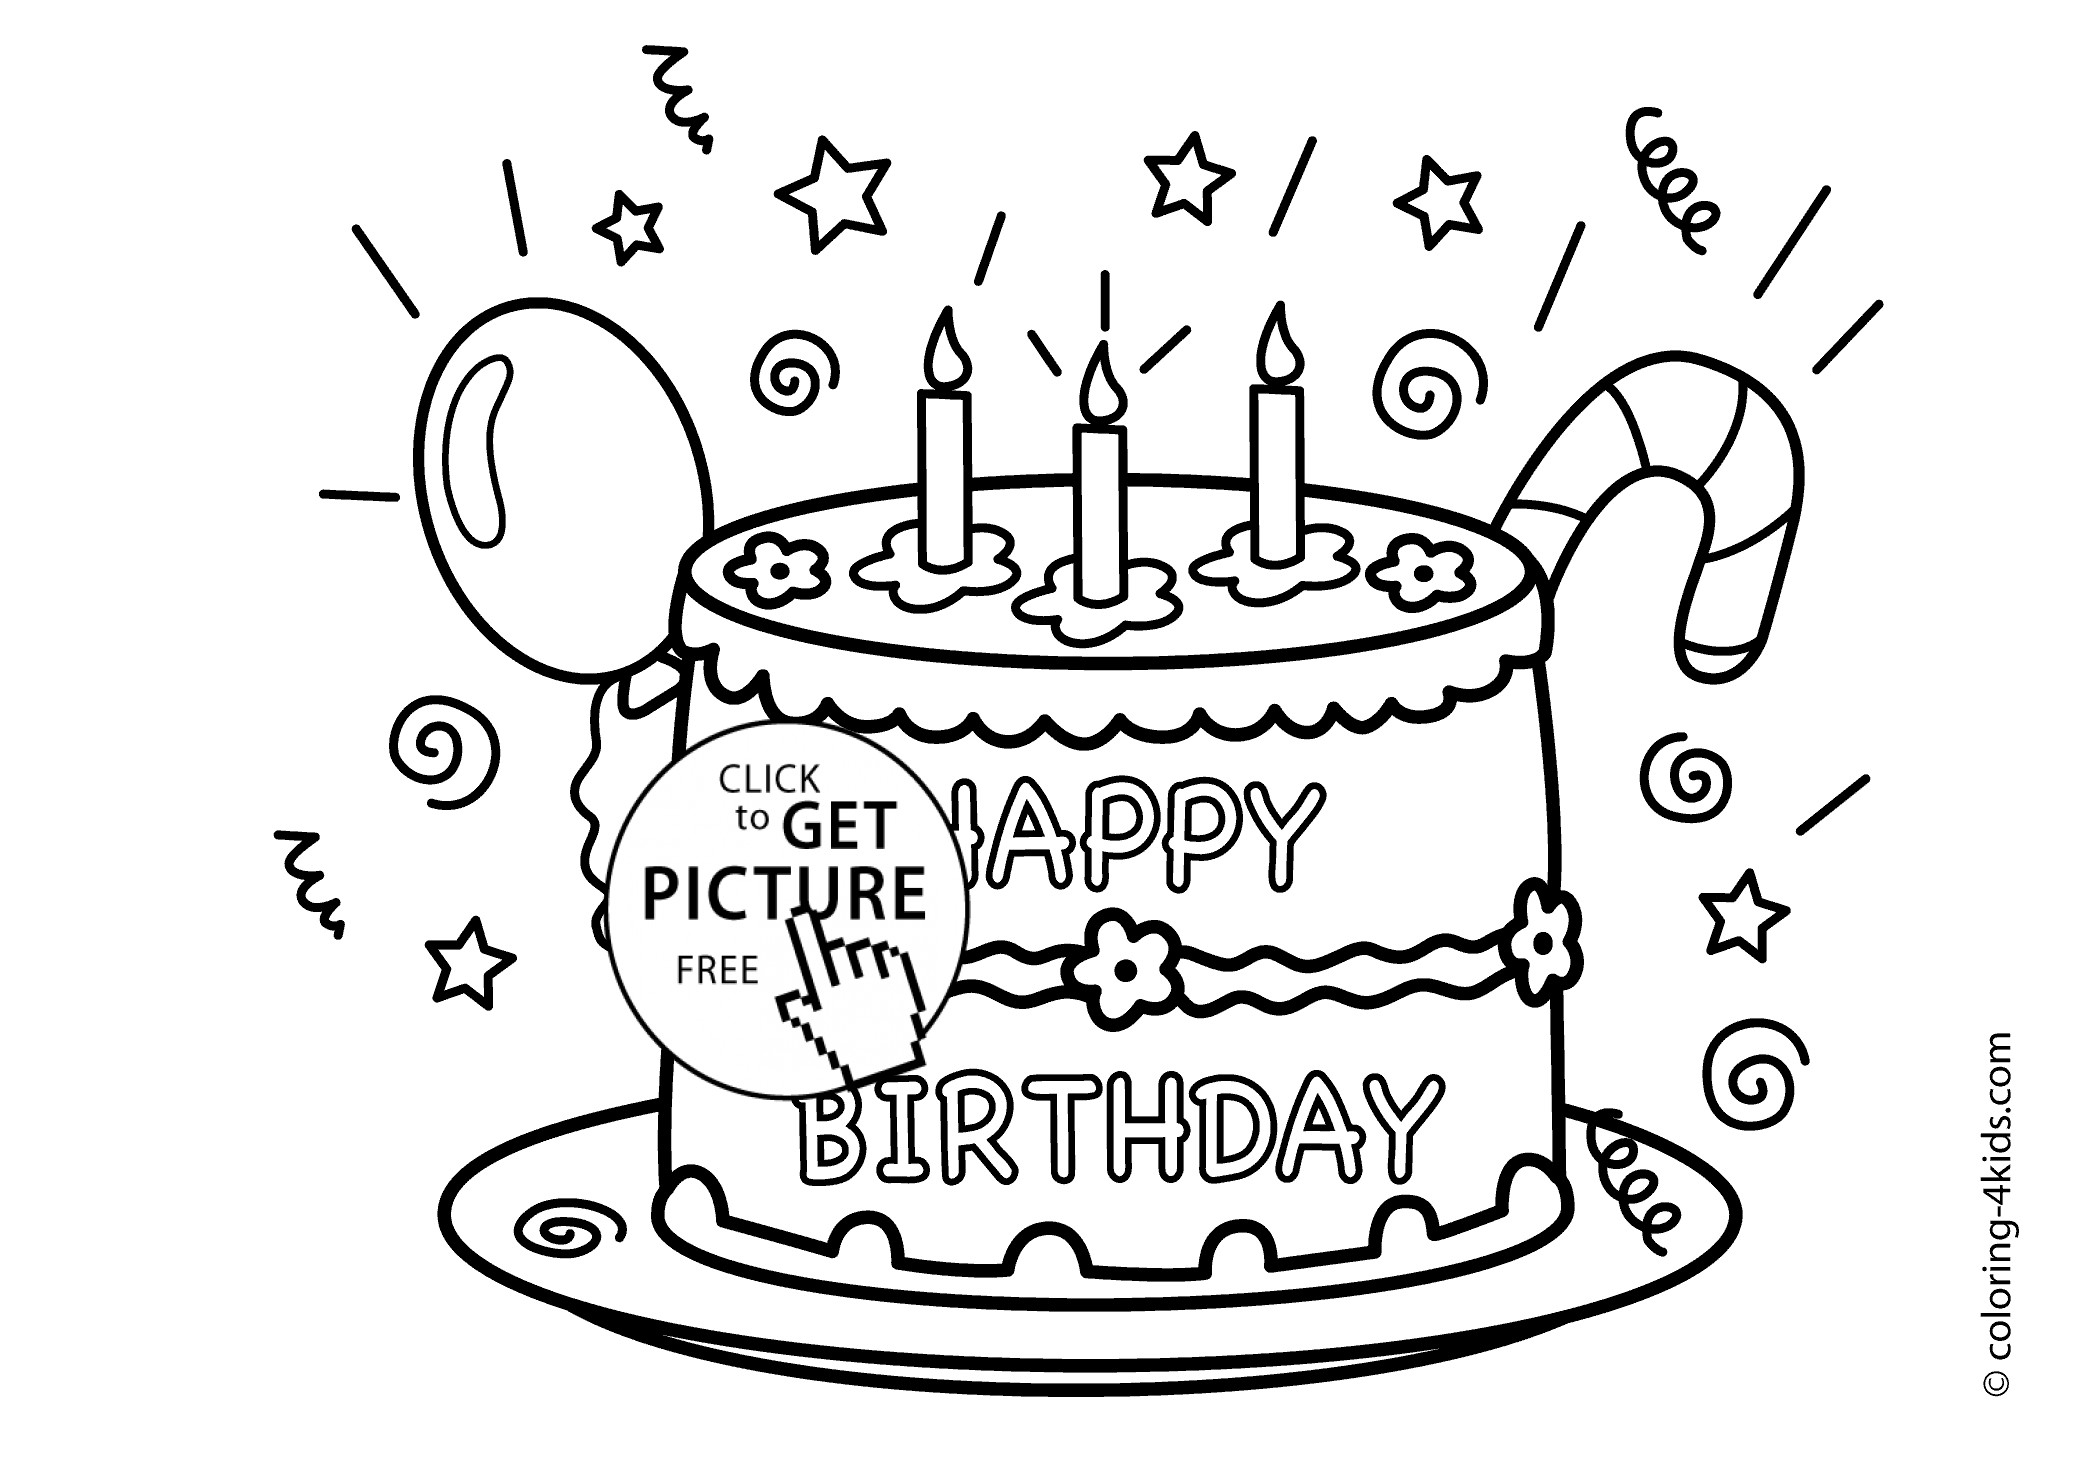 Happy Birthday Coloring Pages For Kids
 Cake Happy Birthday Party Coloring Pages – celebration